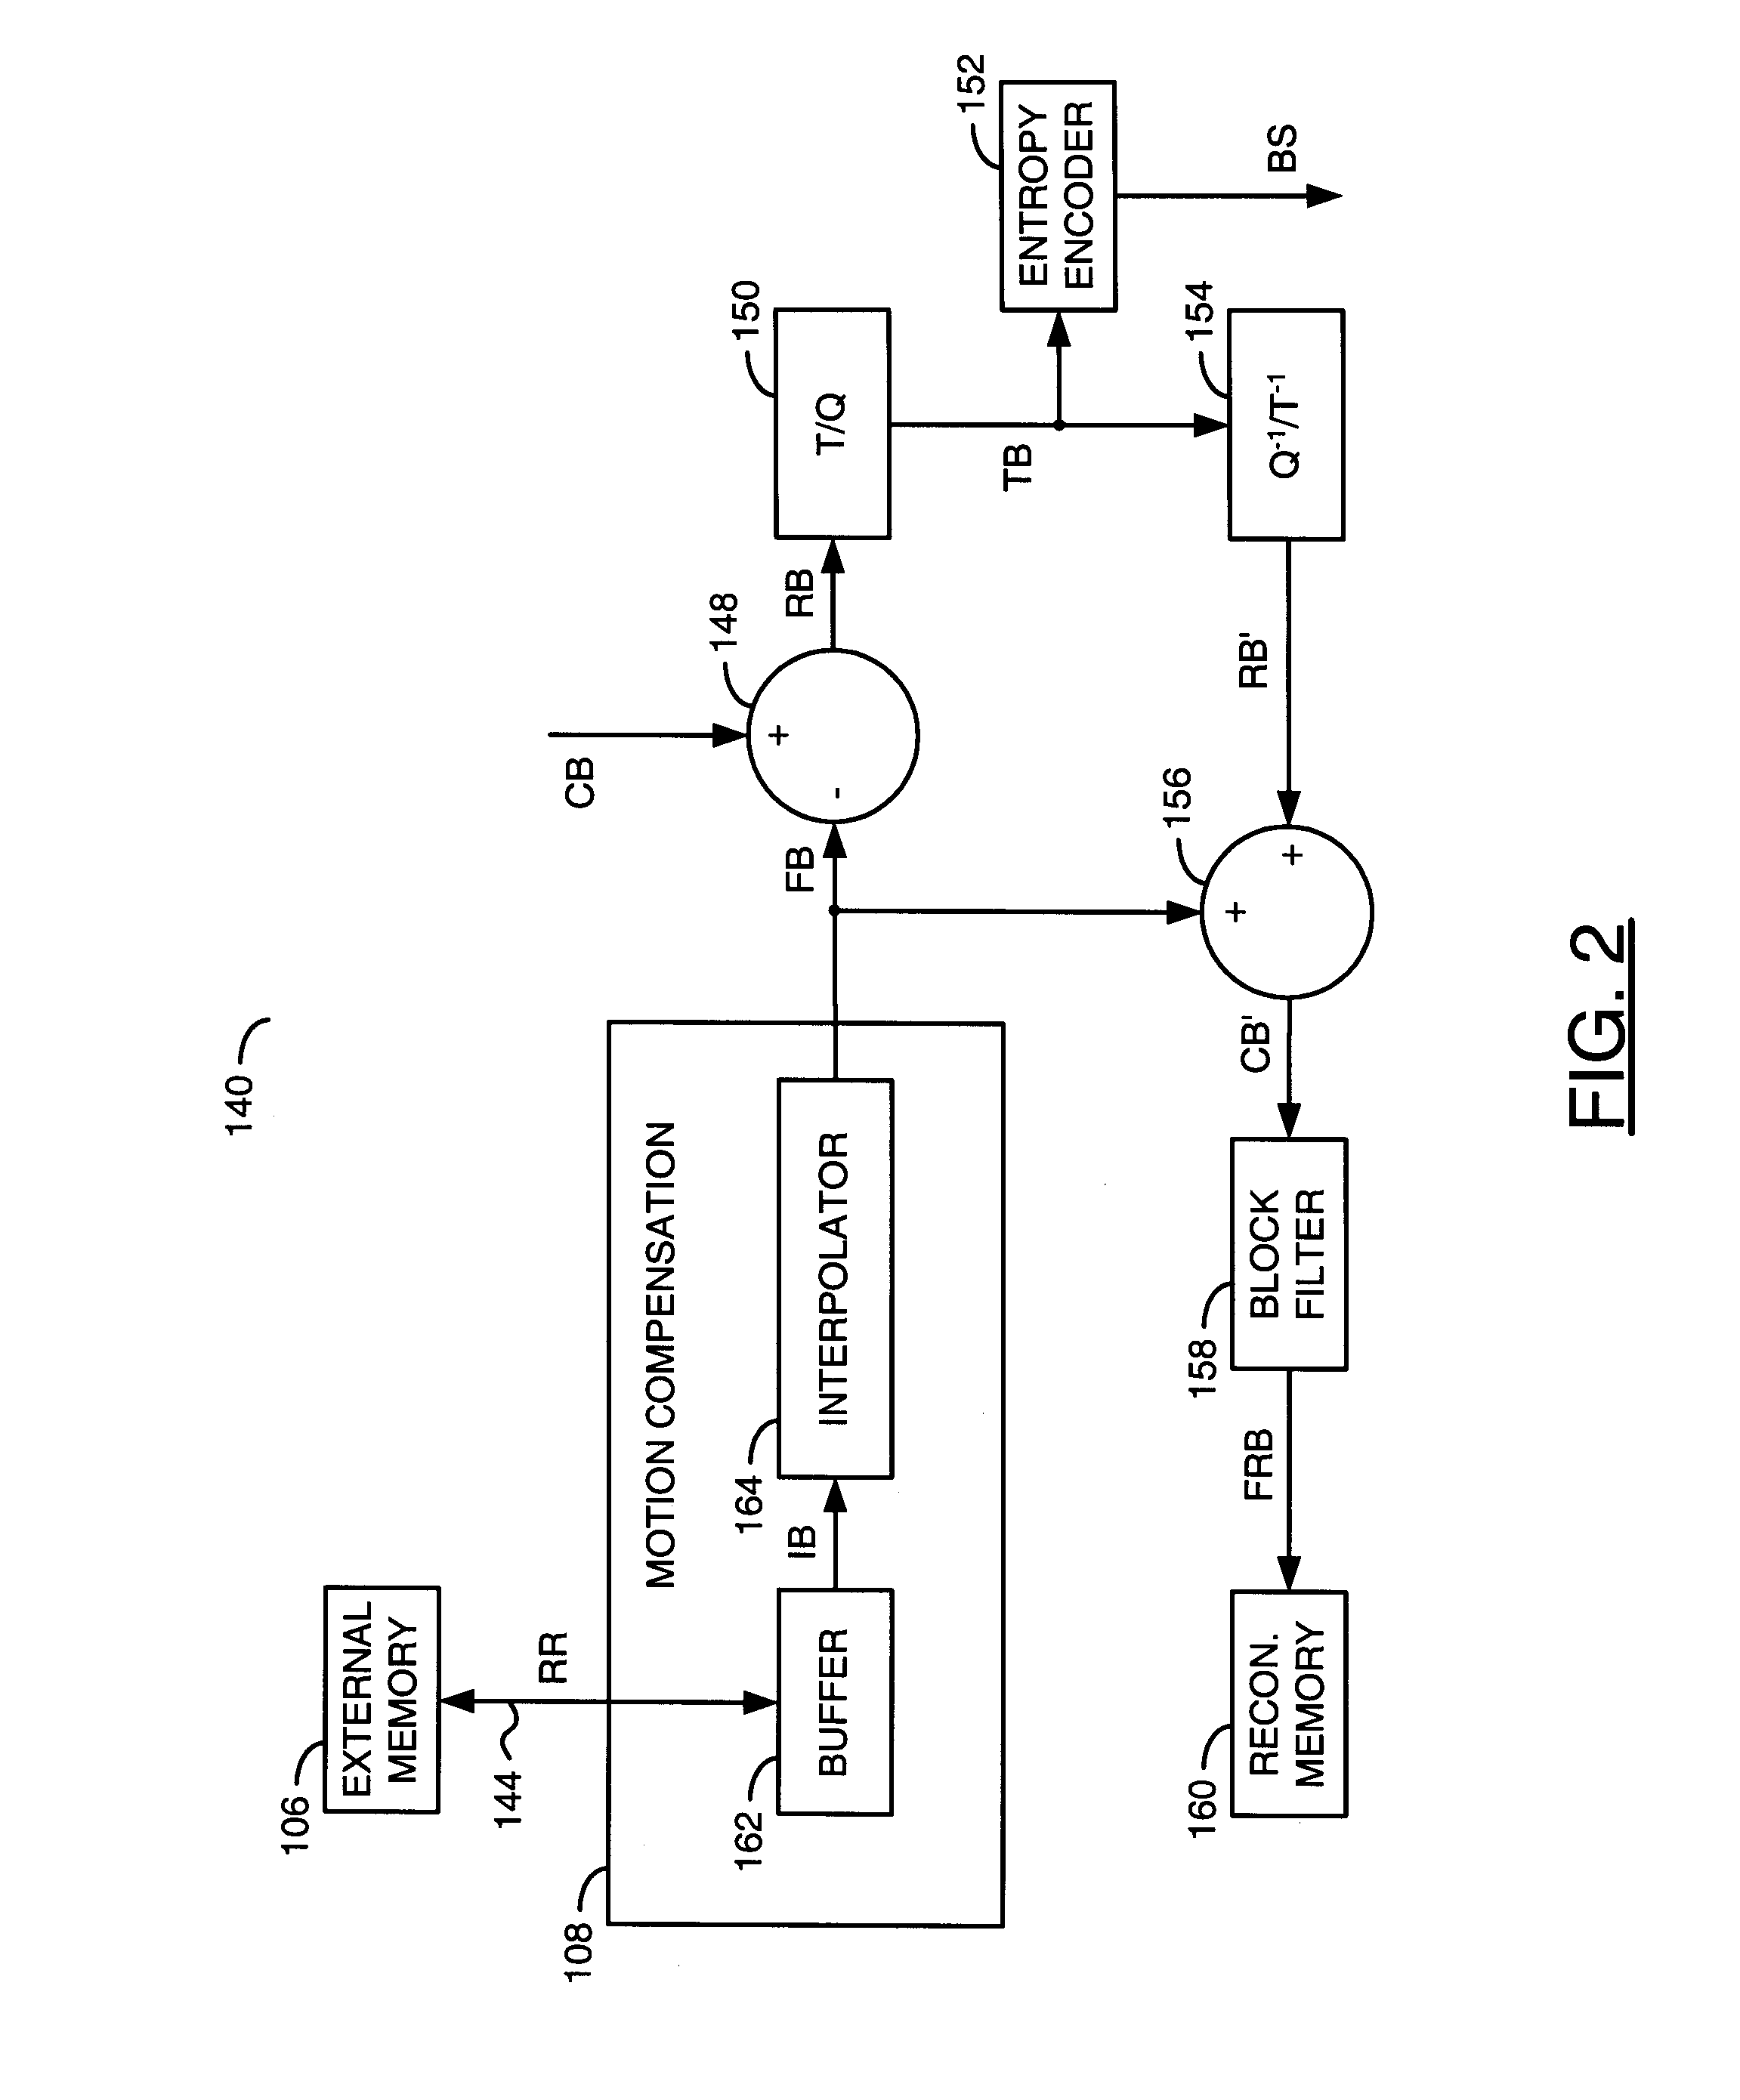 Flexible reduced bandwidth compressed video decoder